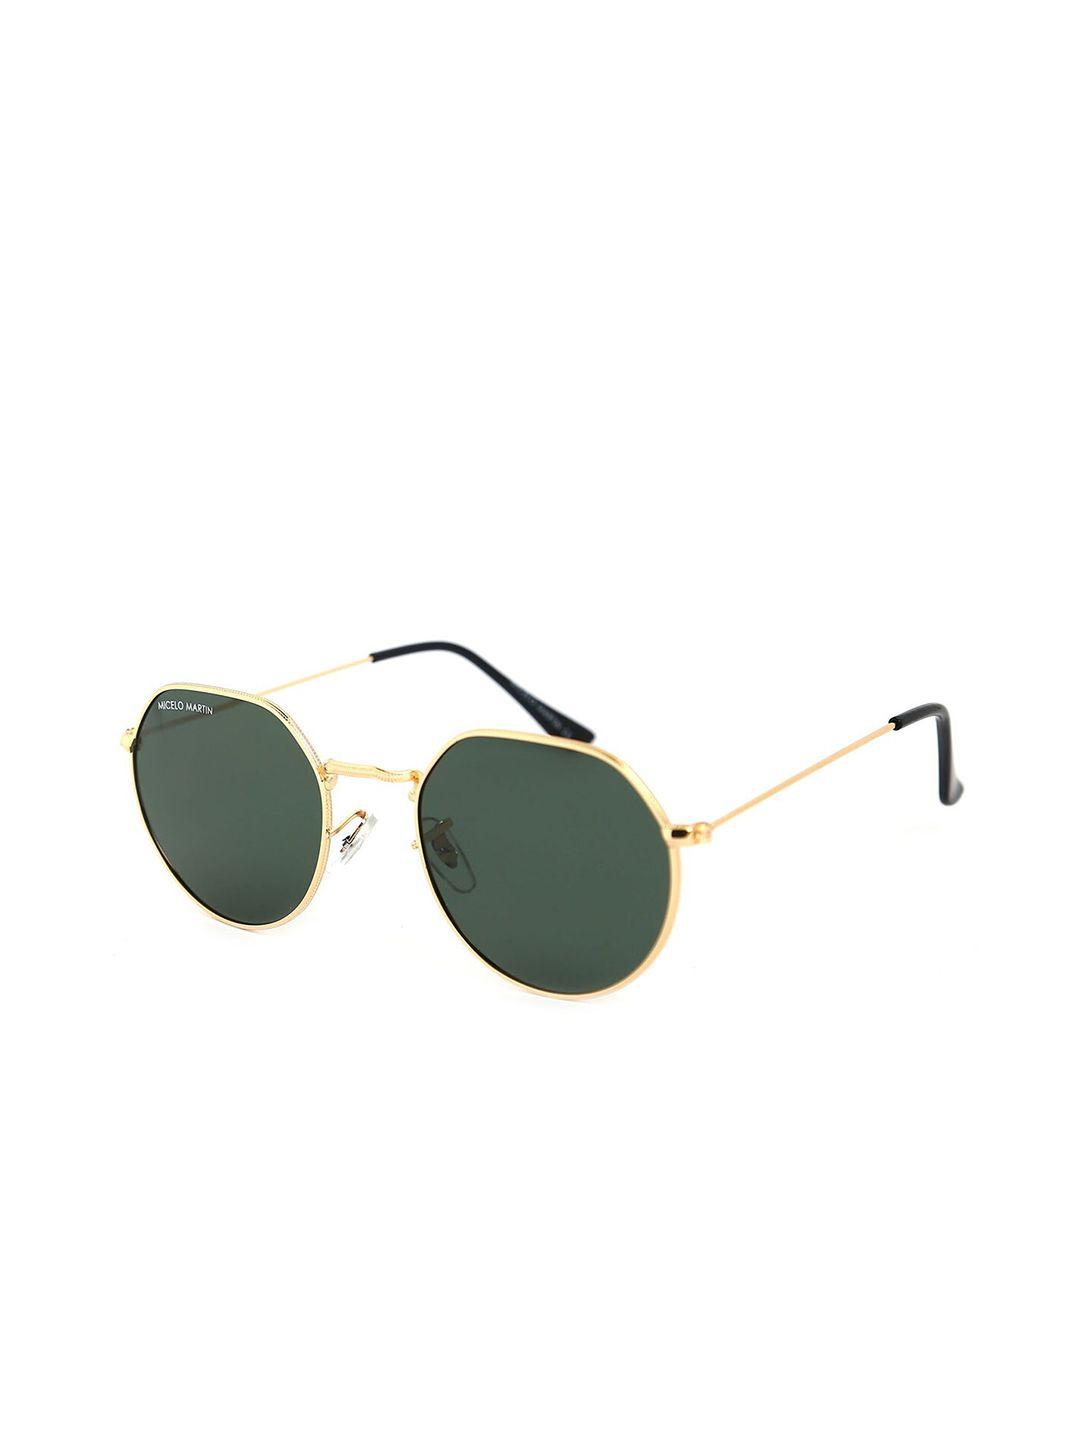 micelo martin unisex green lens & gold-toned round sunglasses with uv protected lens